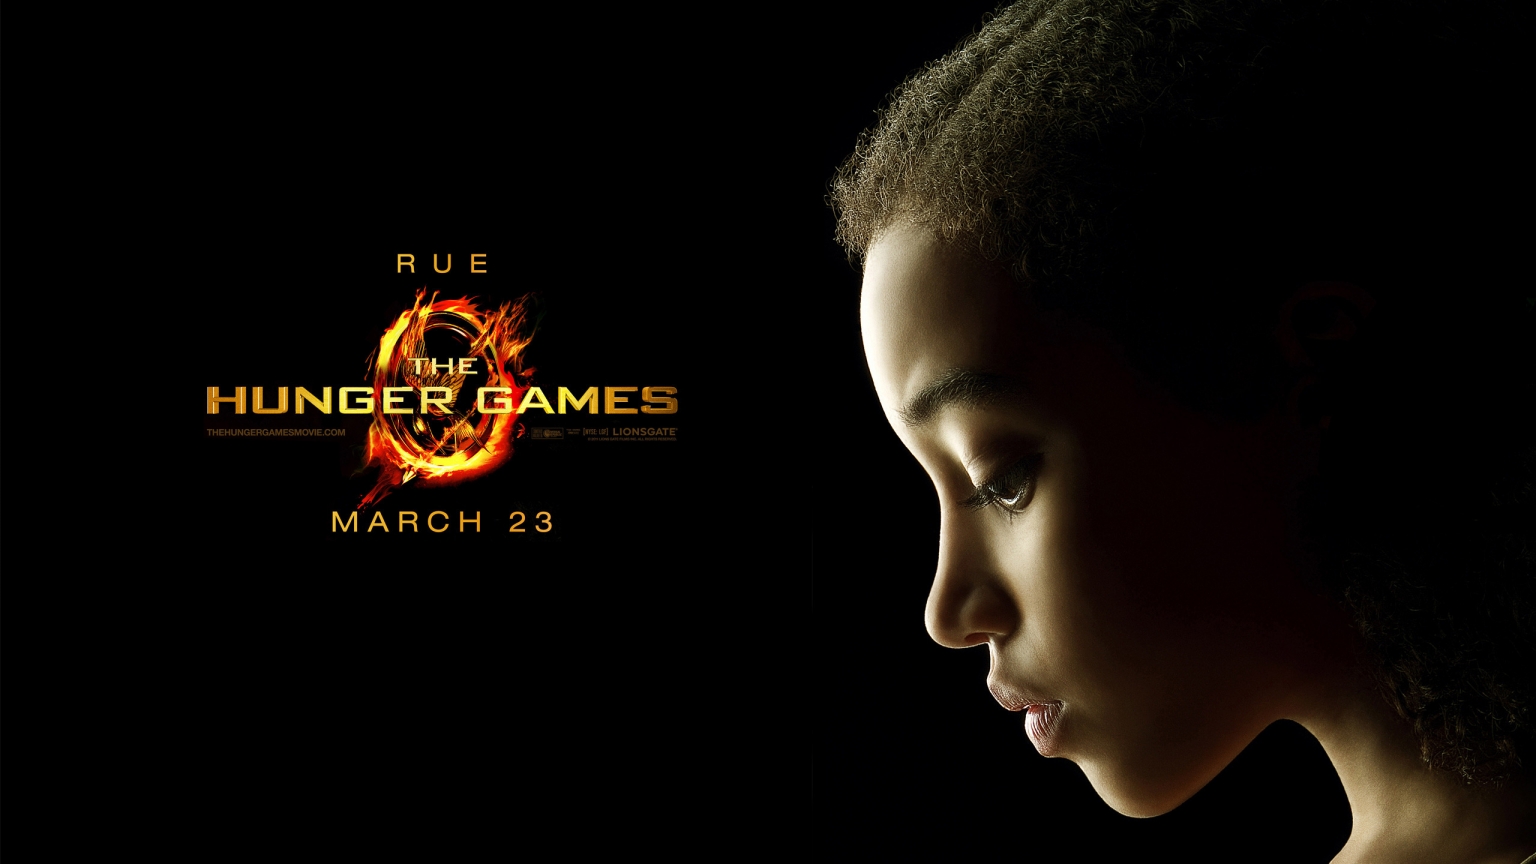 The Hunger Games Rue for 1536 x 864 HDTV resolution